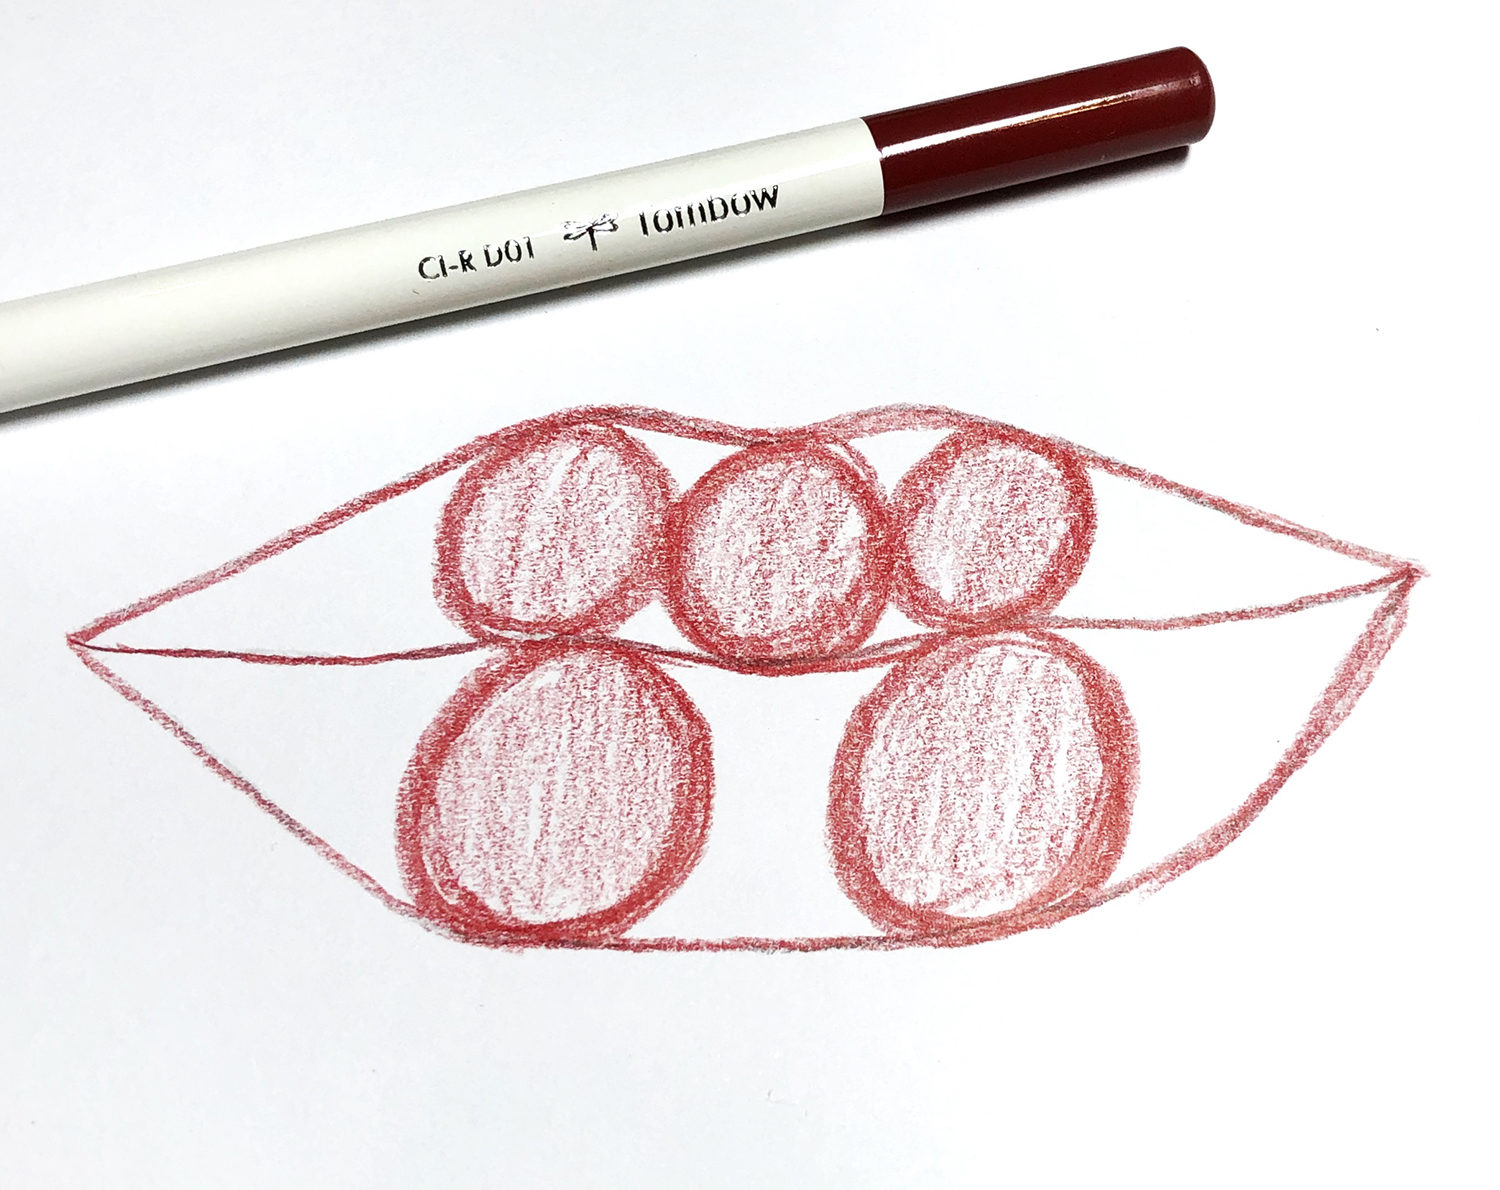 How To Draw Lips Using Irojiten Colored Pencils Tombow Usa Blog Click the lips and cherry coloring pages to view printable version or color it online (compatible with ipad and android tablets). tombow usa blog